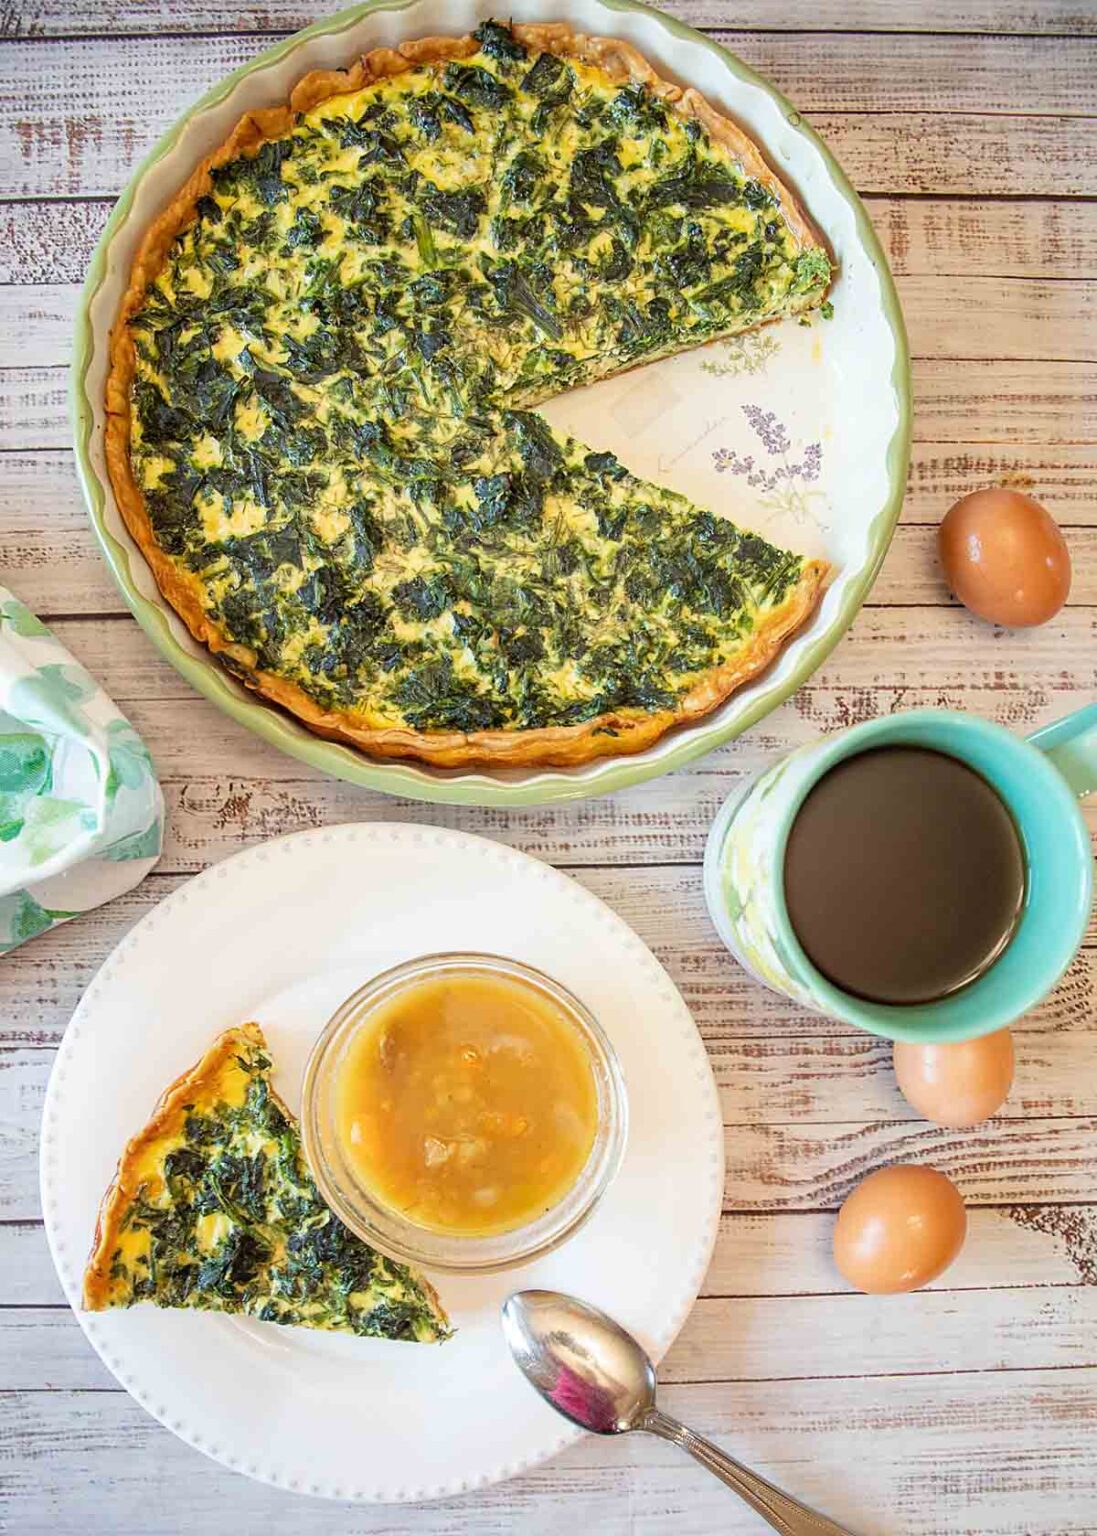 Spinach Feta Quiche – Art of Natural Living